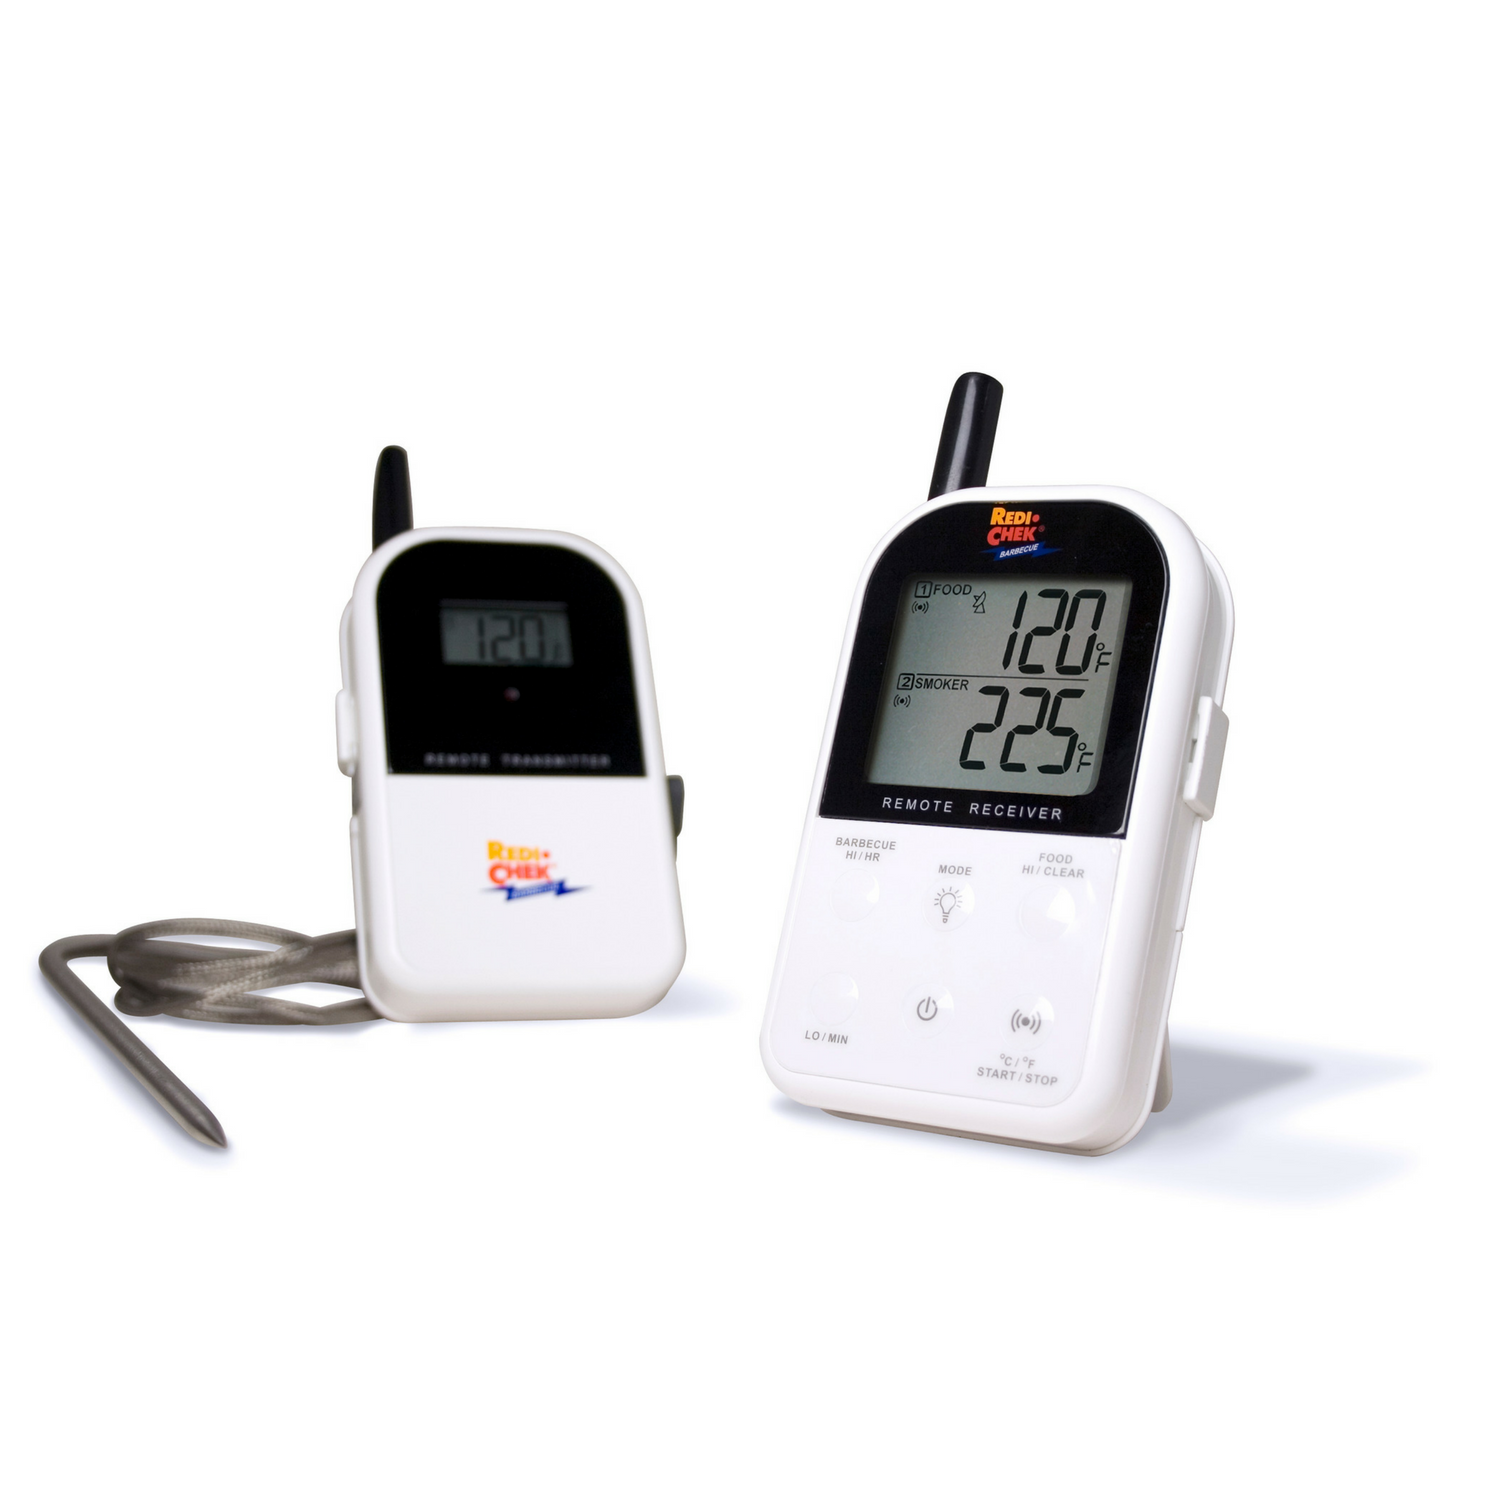 https://www.maverickthermometers.com/wp-content/uploads/2018/05/et-732-white.png